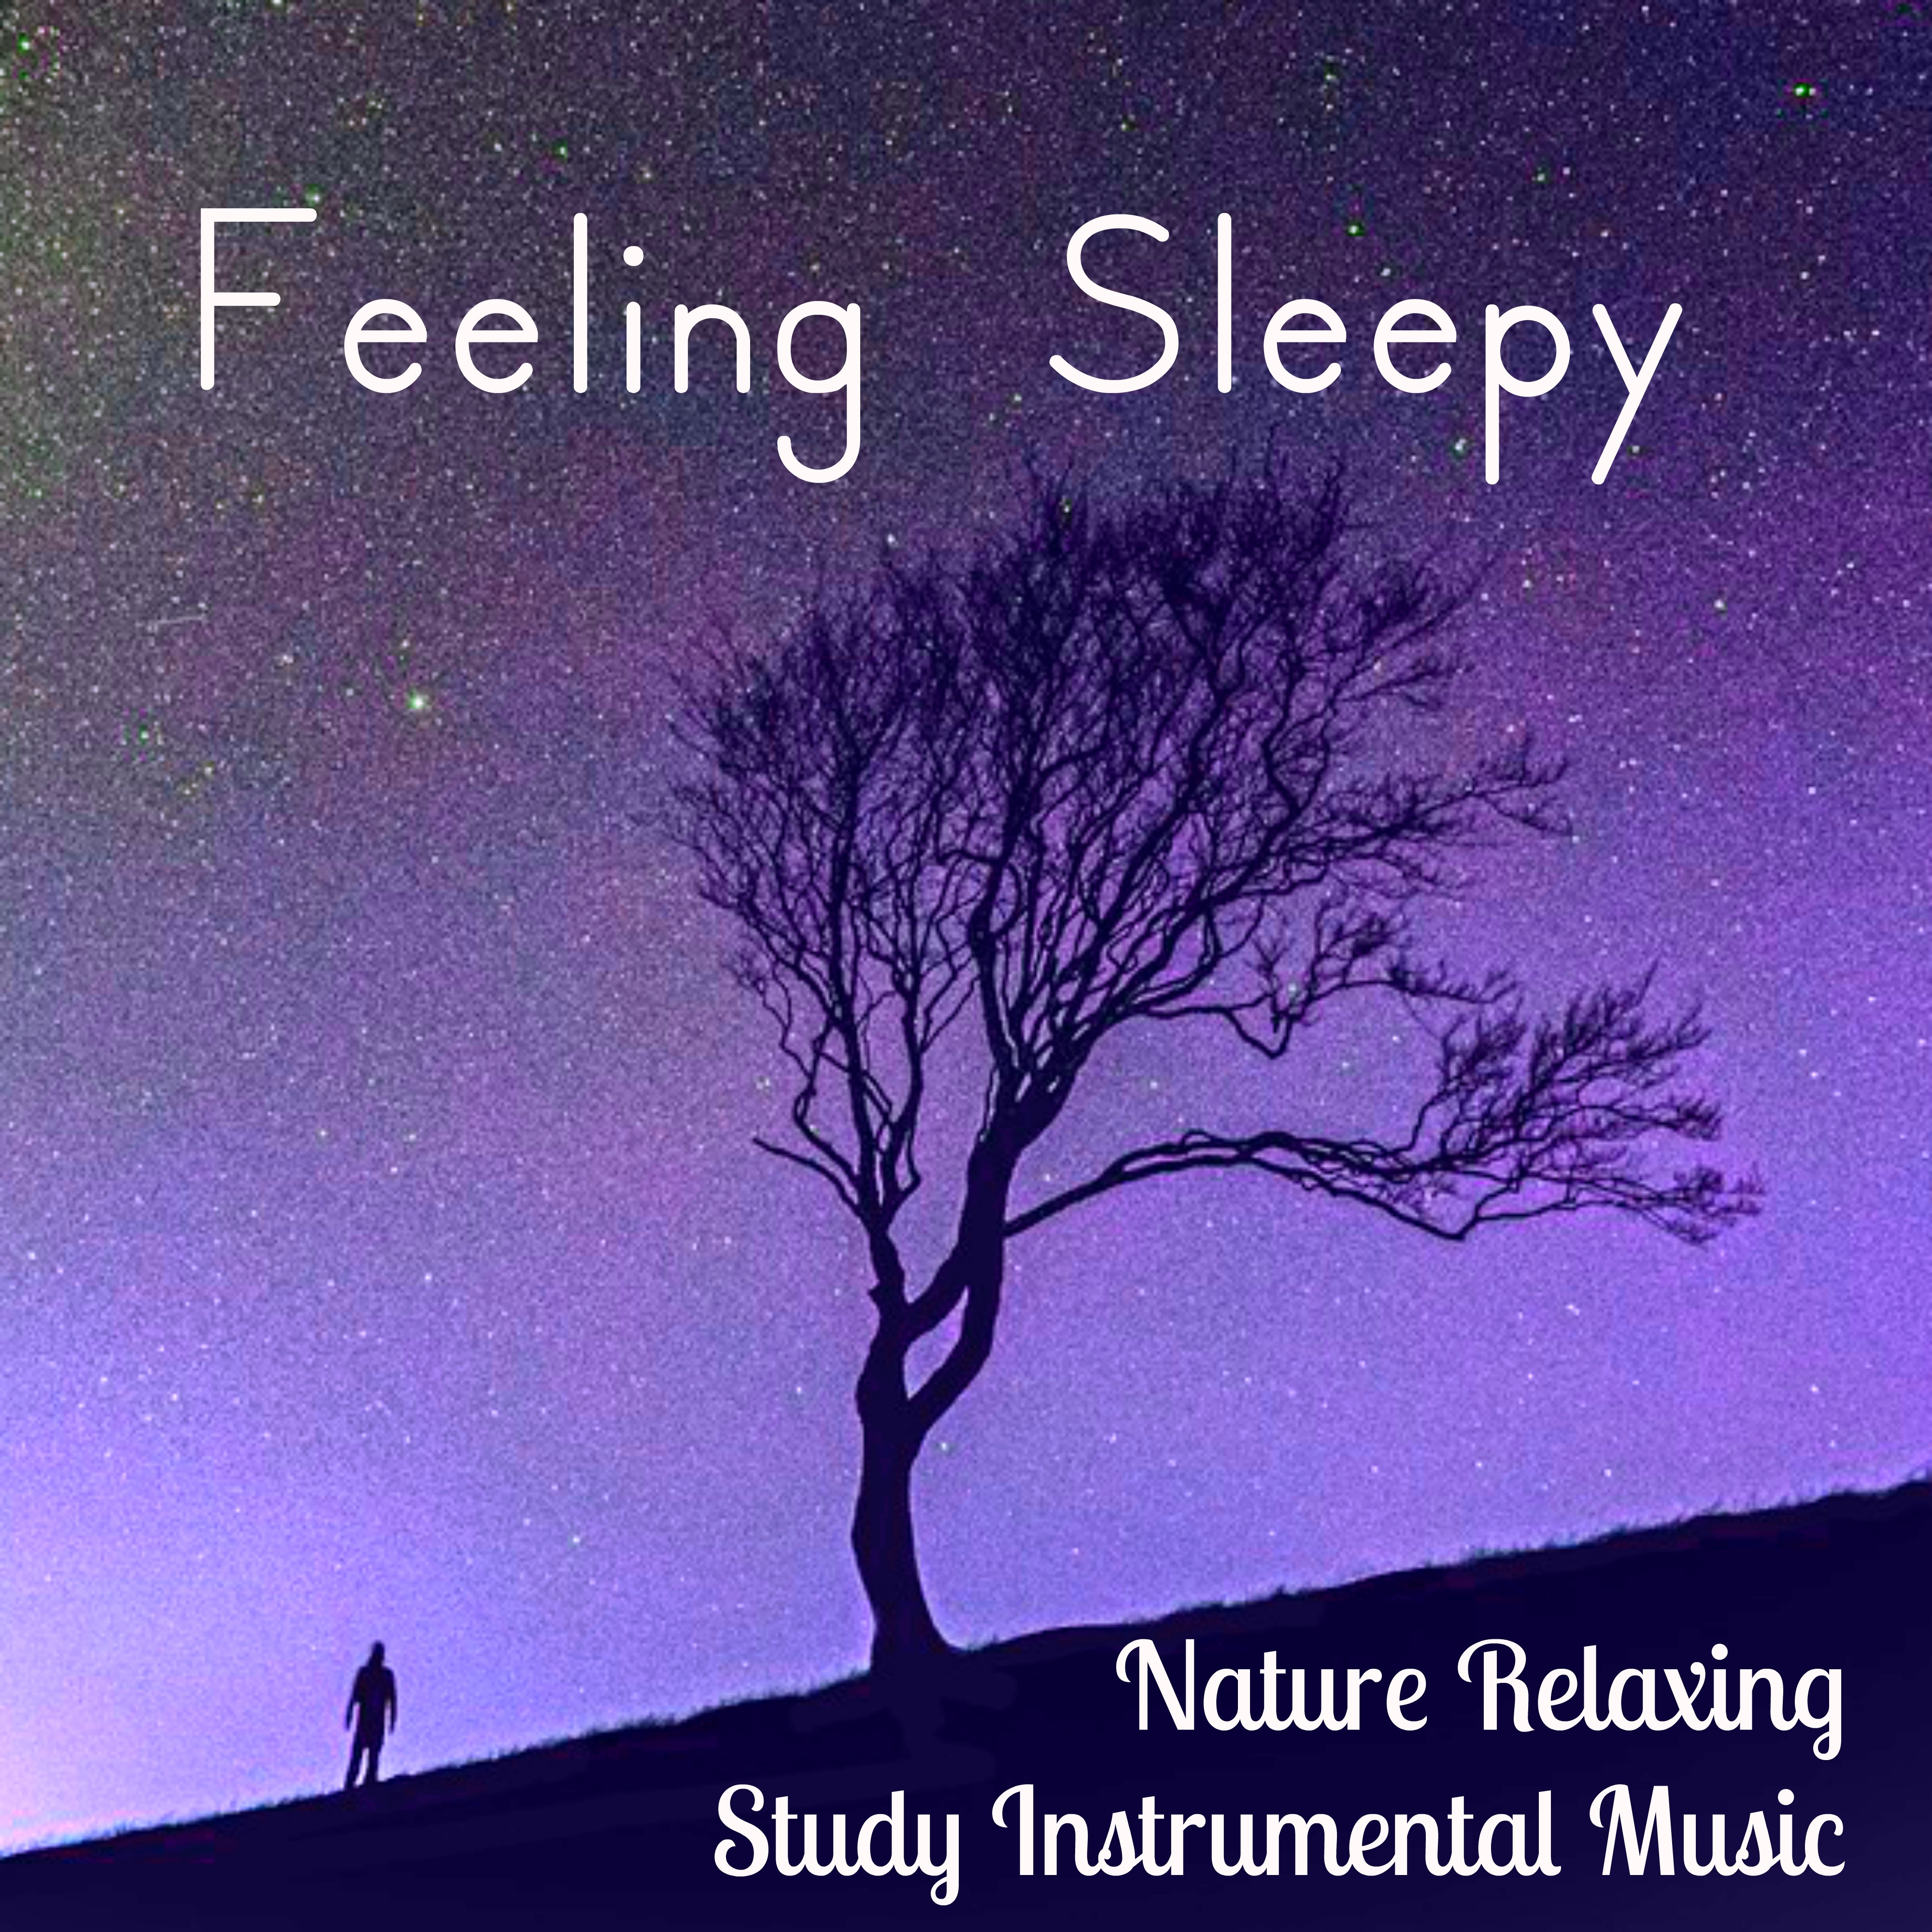 Feeling Sleepy - Nature Relaxing Study Instrumental Music for Yoga Classes Mind Exercises Chakra Therapy with Soothing Meditative New Age Sounds